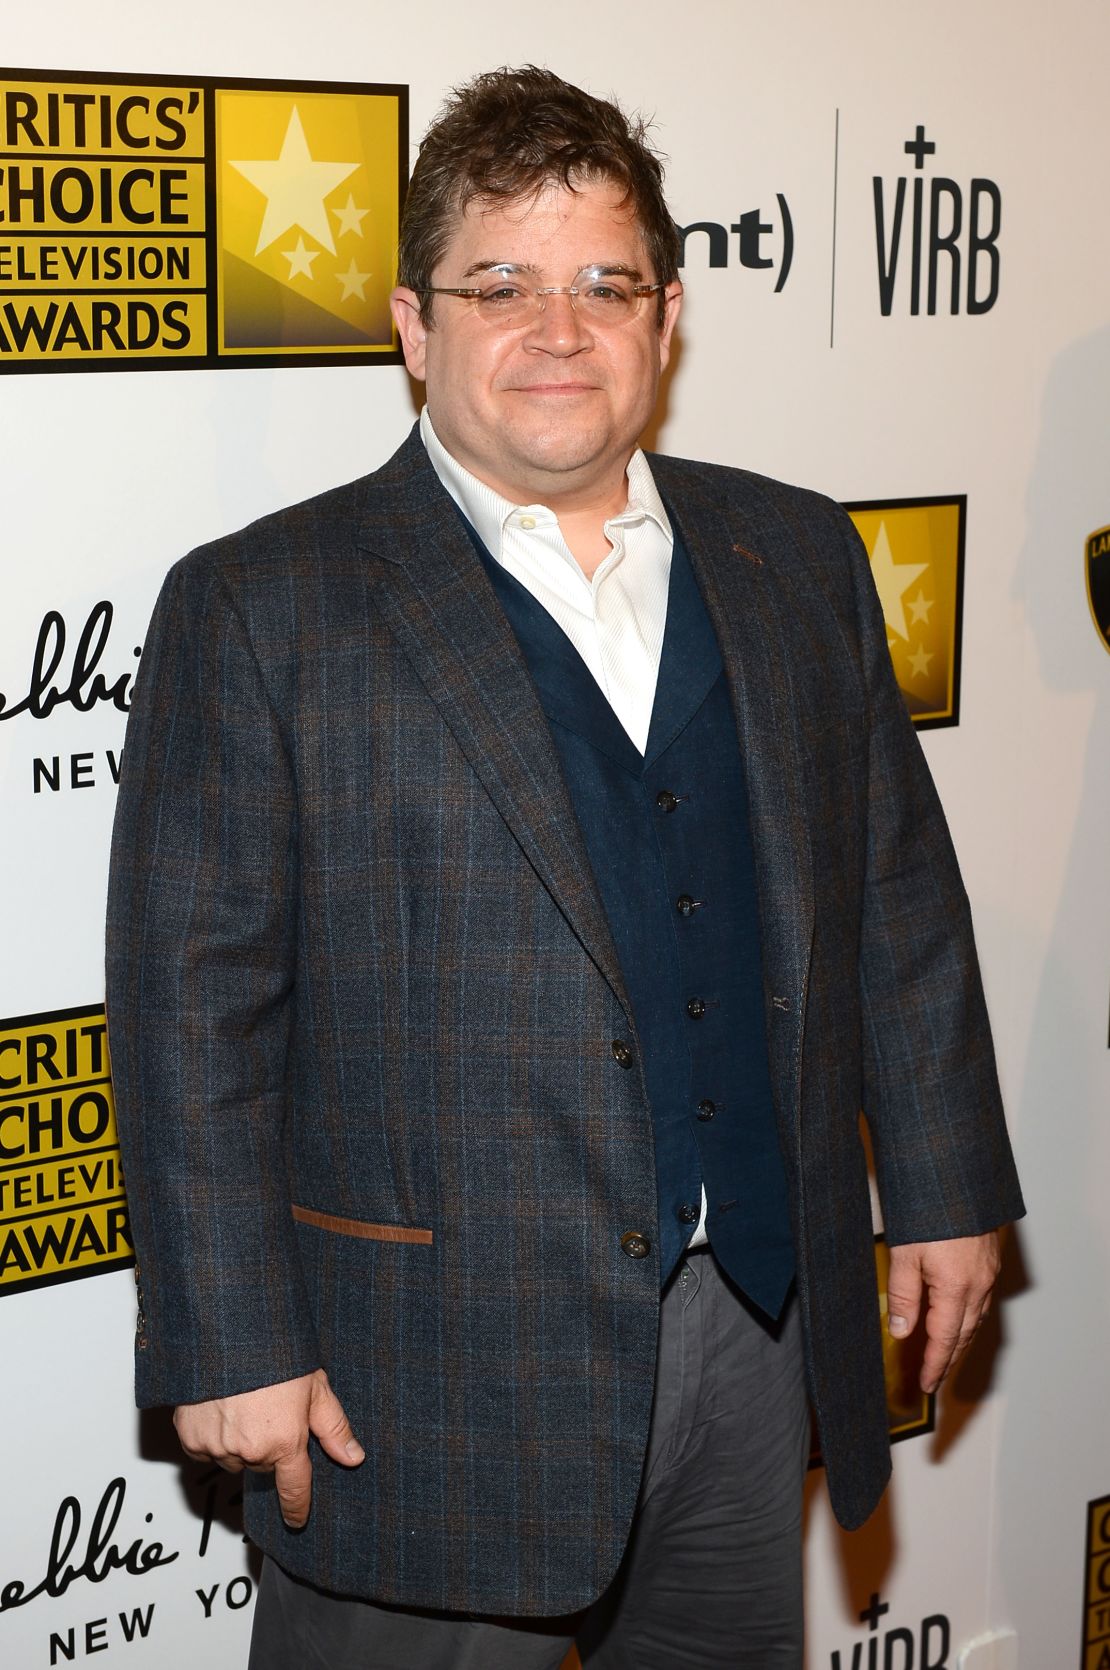 Patton Oswalt recently wrote that he's reconsidered his position on rape jokes.